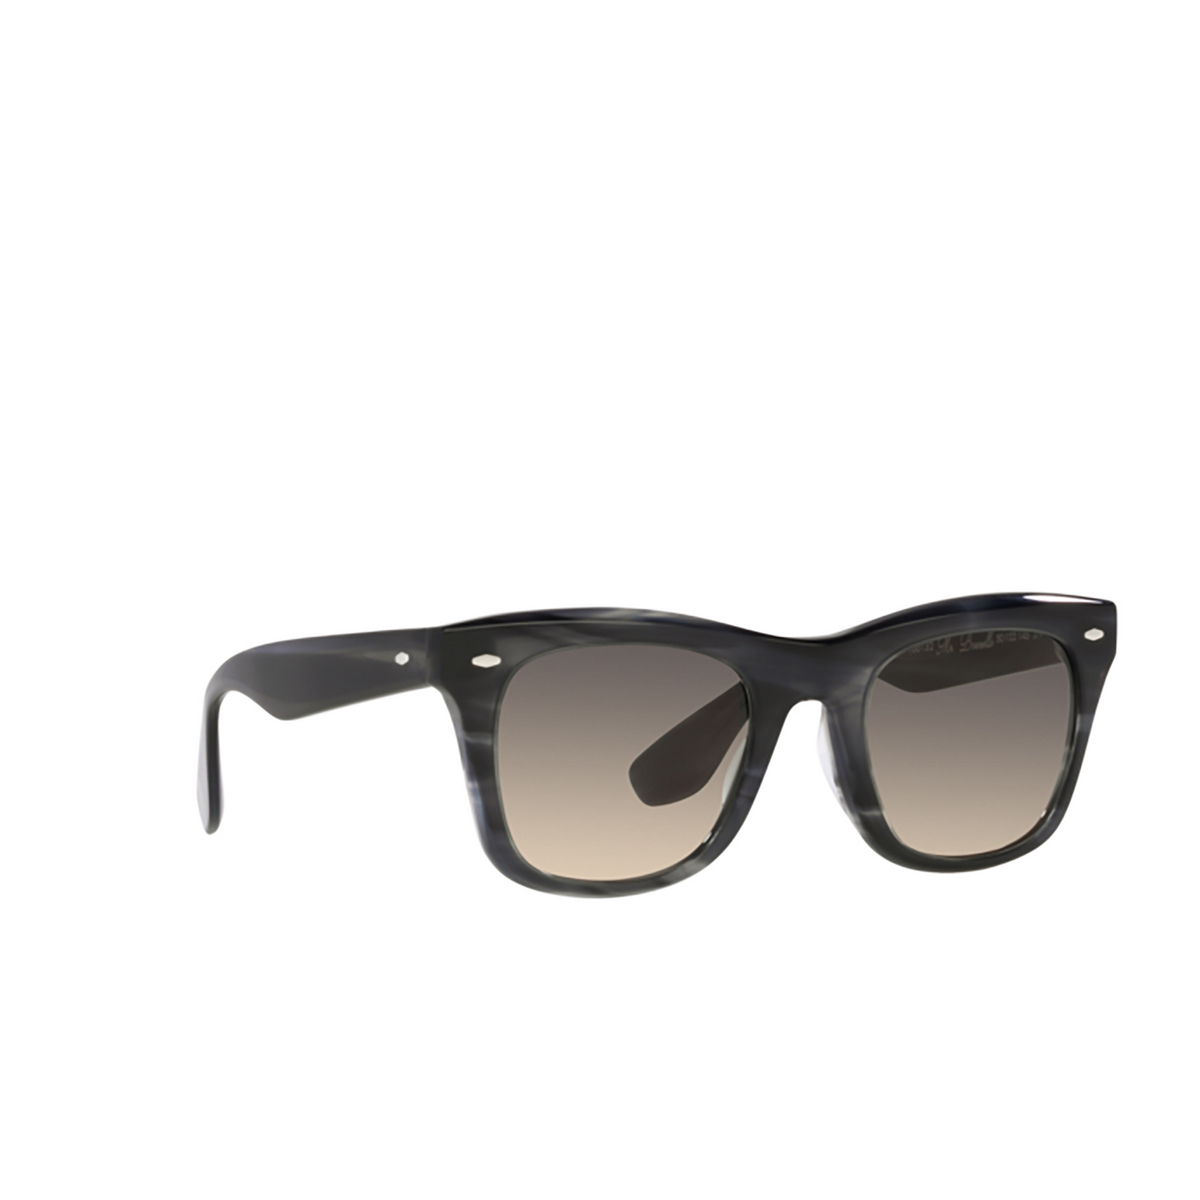 Oliver Peoples MR. BRUNELLO Sunglasses 166132 Charcoal tortoise - three-quarters view